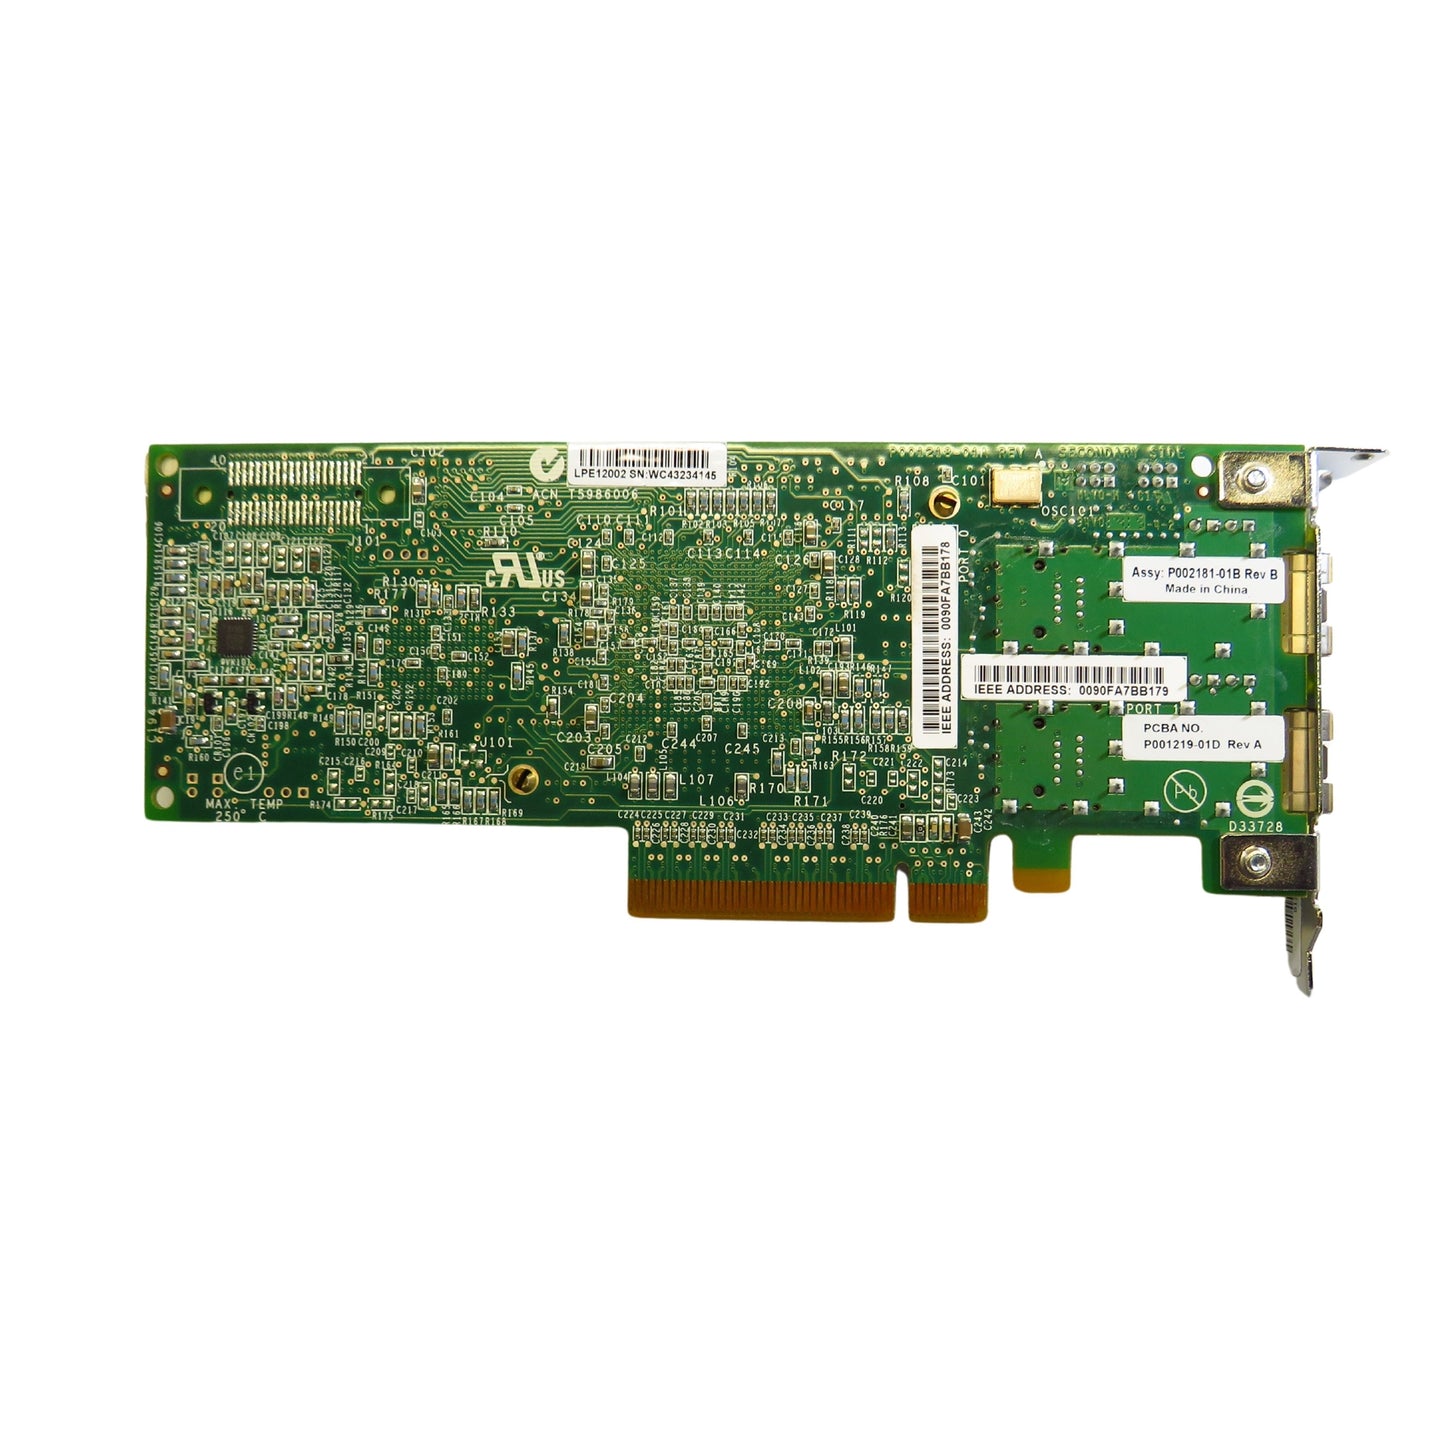 IBM 00ND485 577D LPE12002 2 Port 8Gbps SFP Adapter Card (Refurbished)